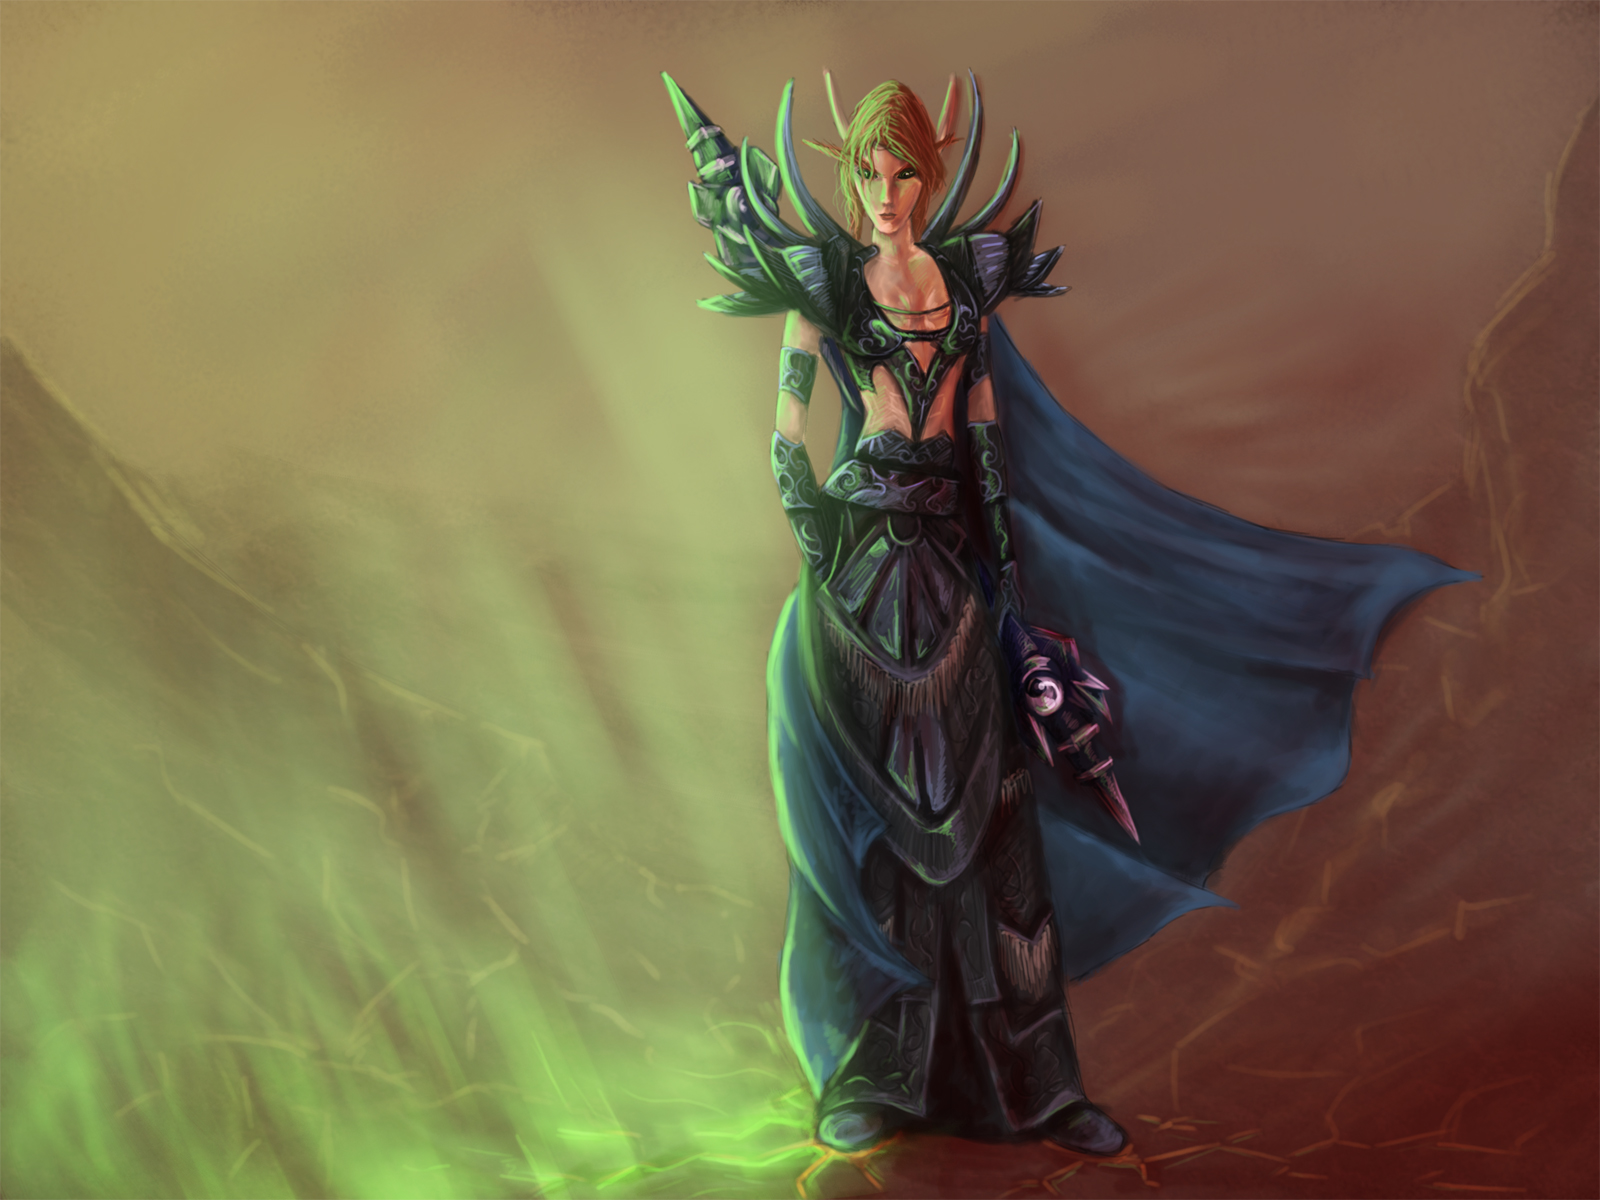 Blood Elf Mage wallpaper from Fantasy wallpapers